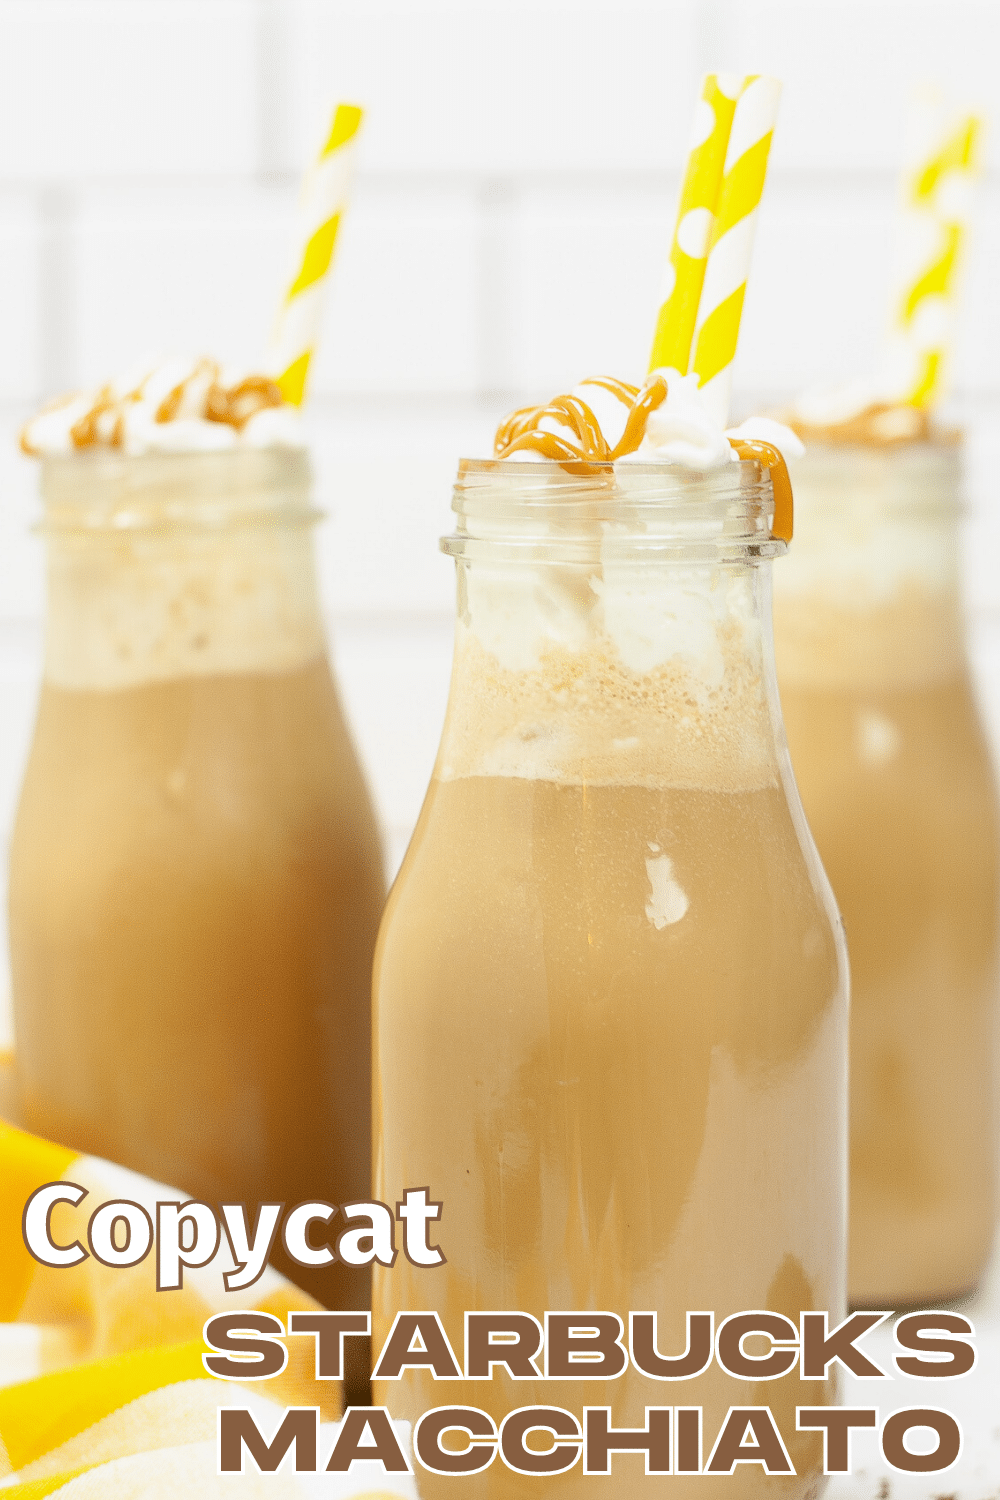 This Copycat Starbucks Iced Caramel Macchiato Recipe tastes just like the real deal. Save money & make it at home for a fraction of the cost! #copycatstarbucks #icedcaramelmacchiato #savemoney #recipe via @wondermomwannab